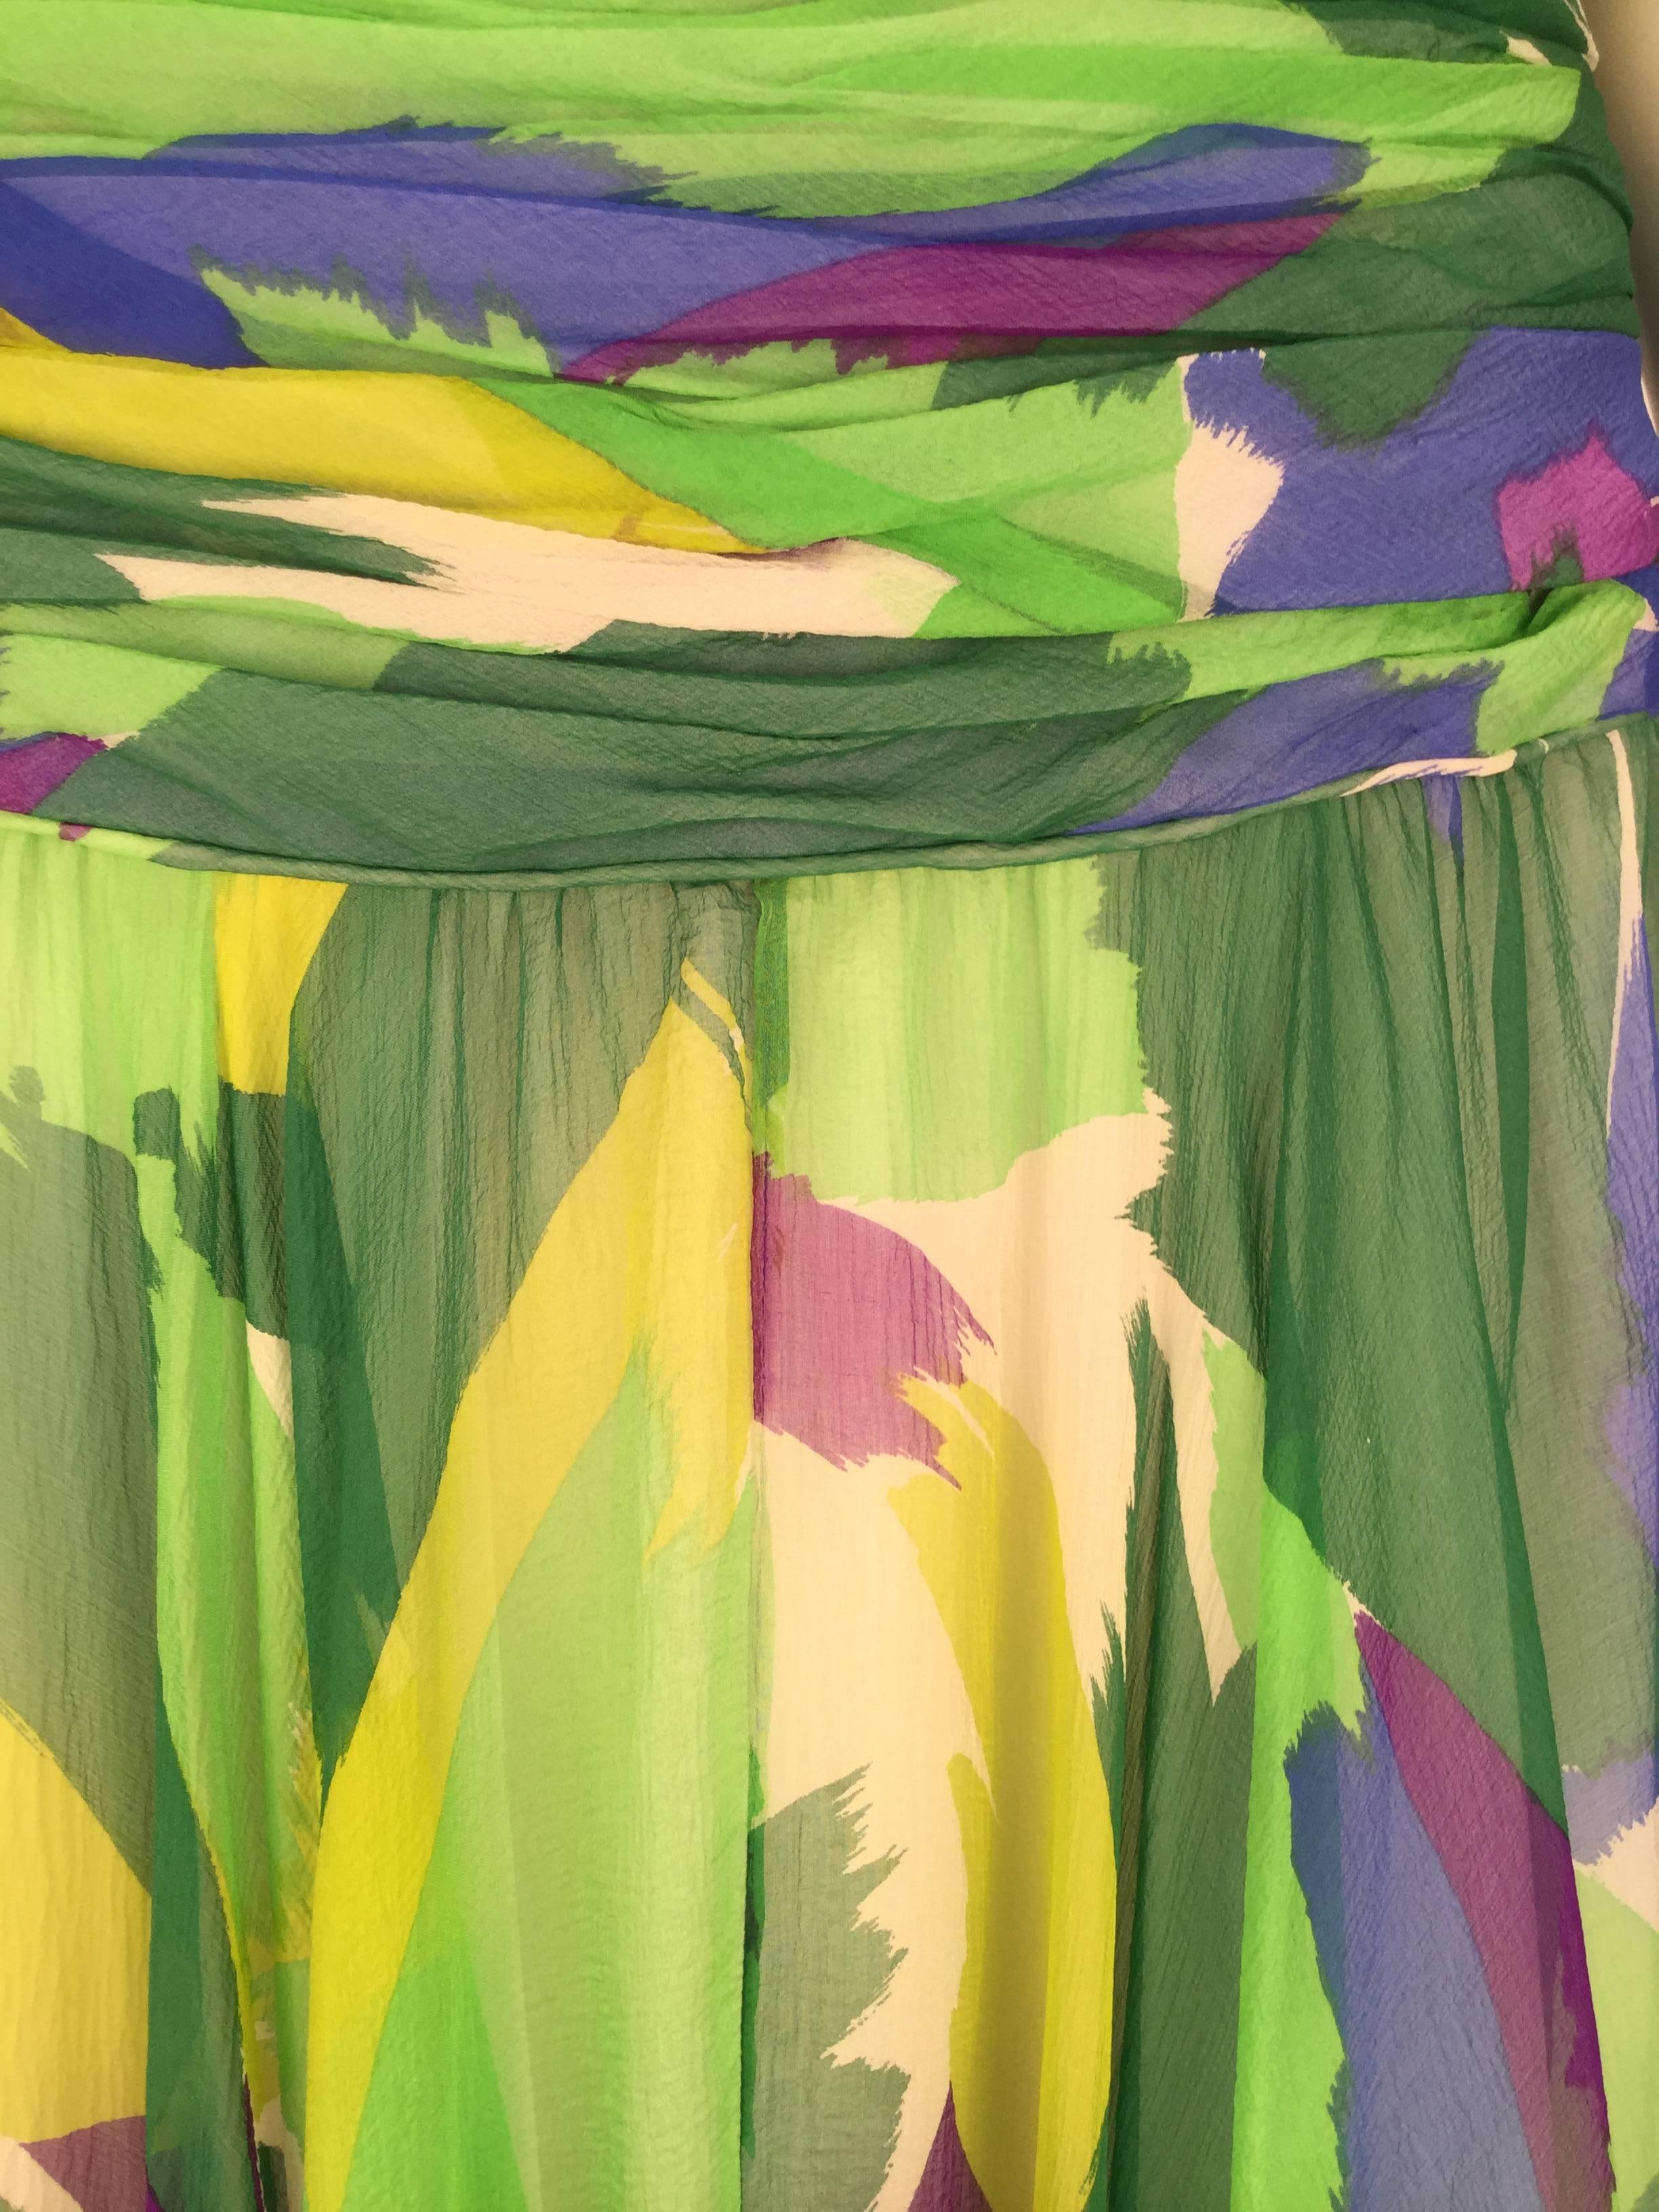 Gorgeous 1990's dress printed with an abstract multicolored design comprised of shades of green, blue, purple, and yellow. The bodice is beautifully gathered along the sides leading into a full skirt beginning with a dropped waist. The shoulders are